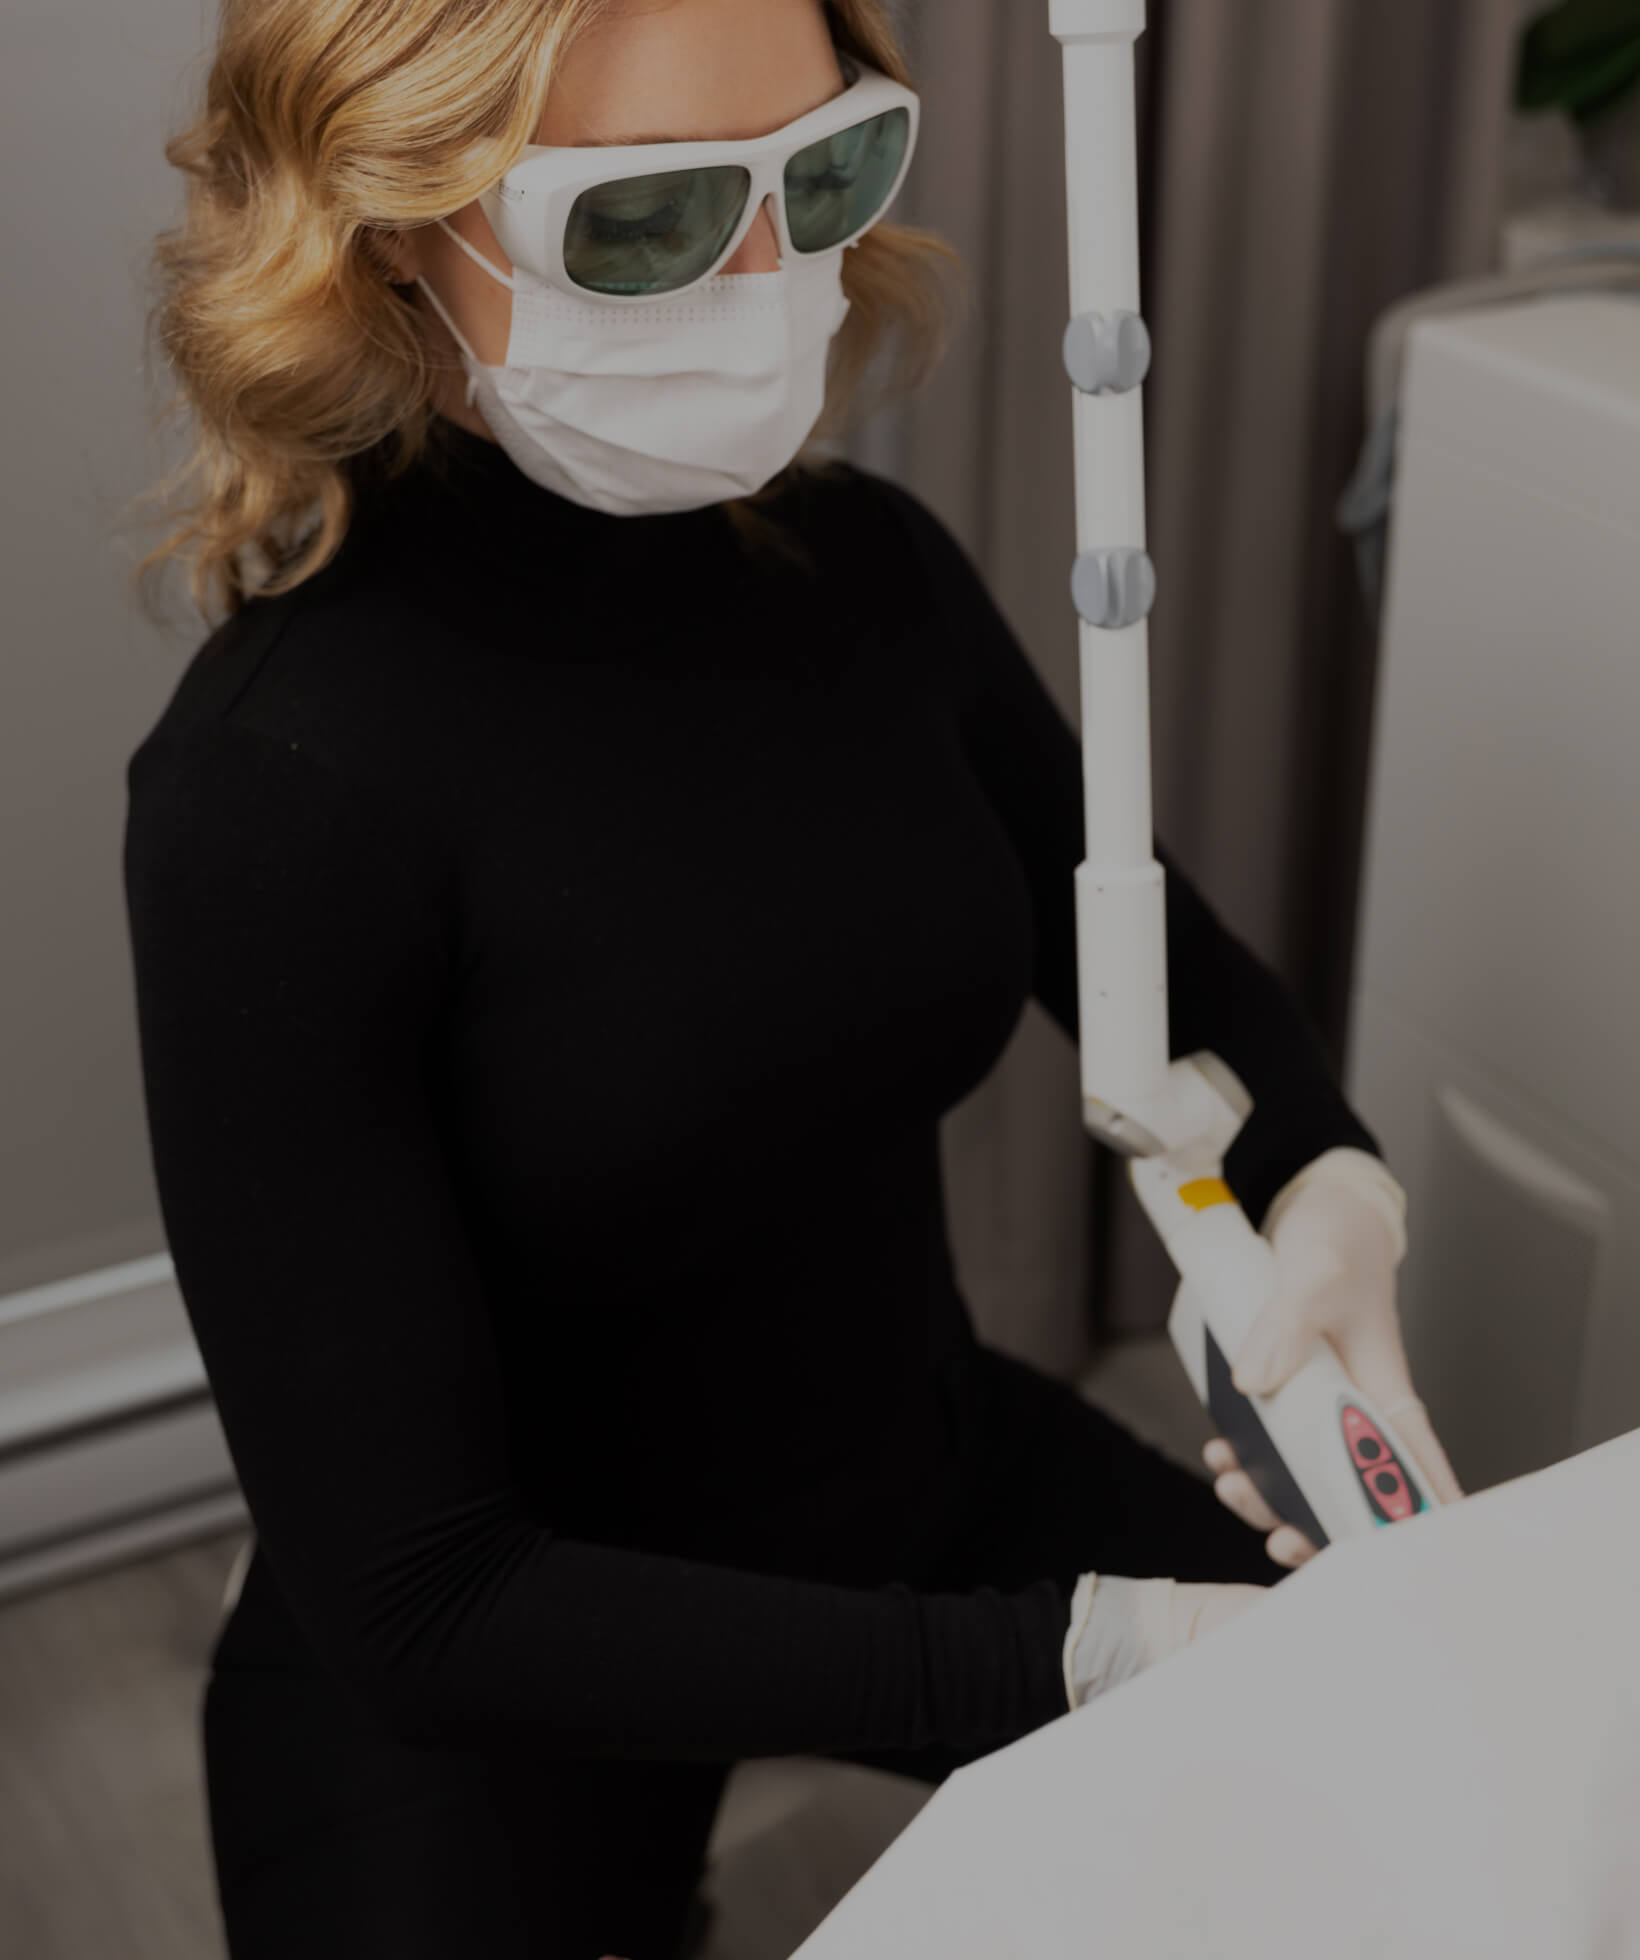 A nurse at Clinique Chloé treating a patient with the Fotona IncontiLase laser for urinary incontinence